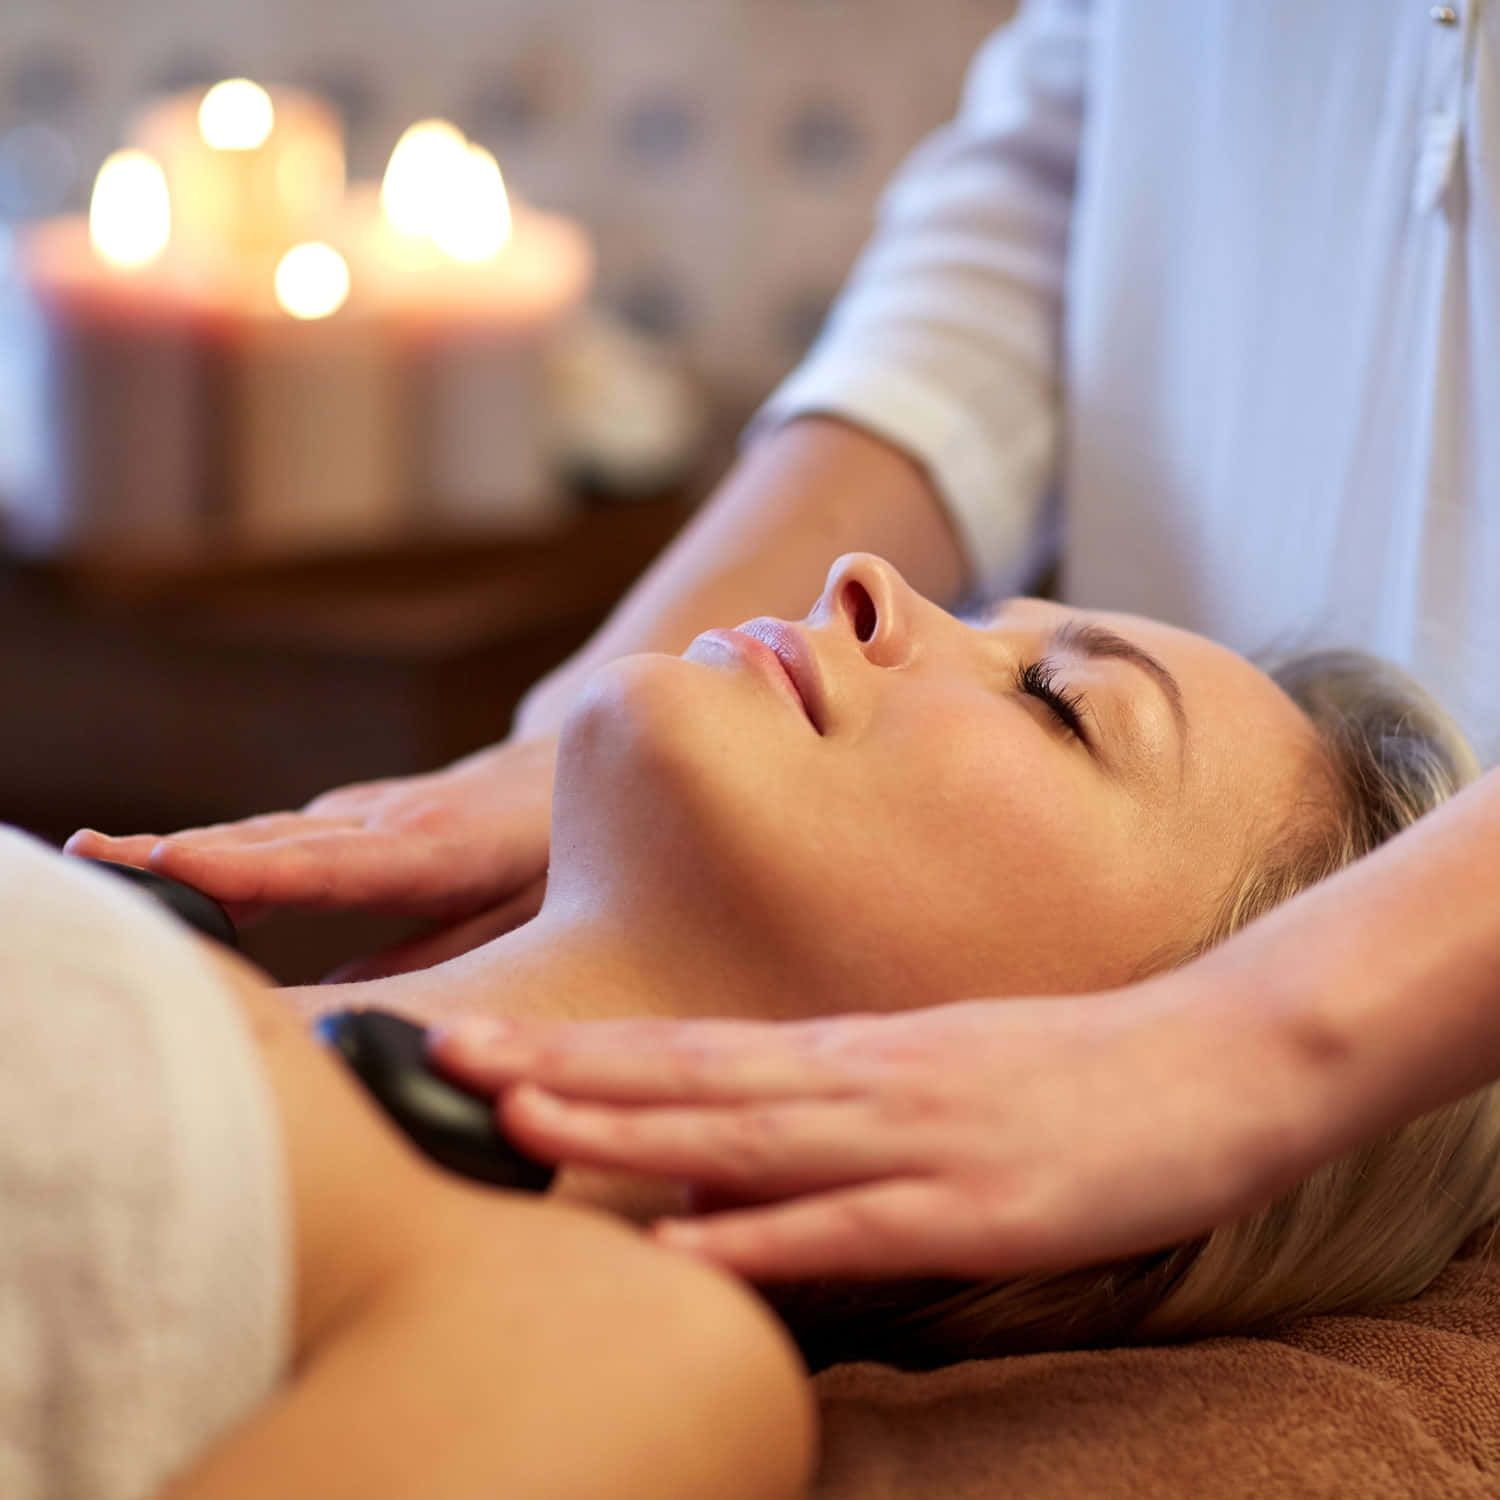 A Woman Getting A Massage At A Spa